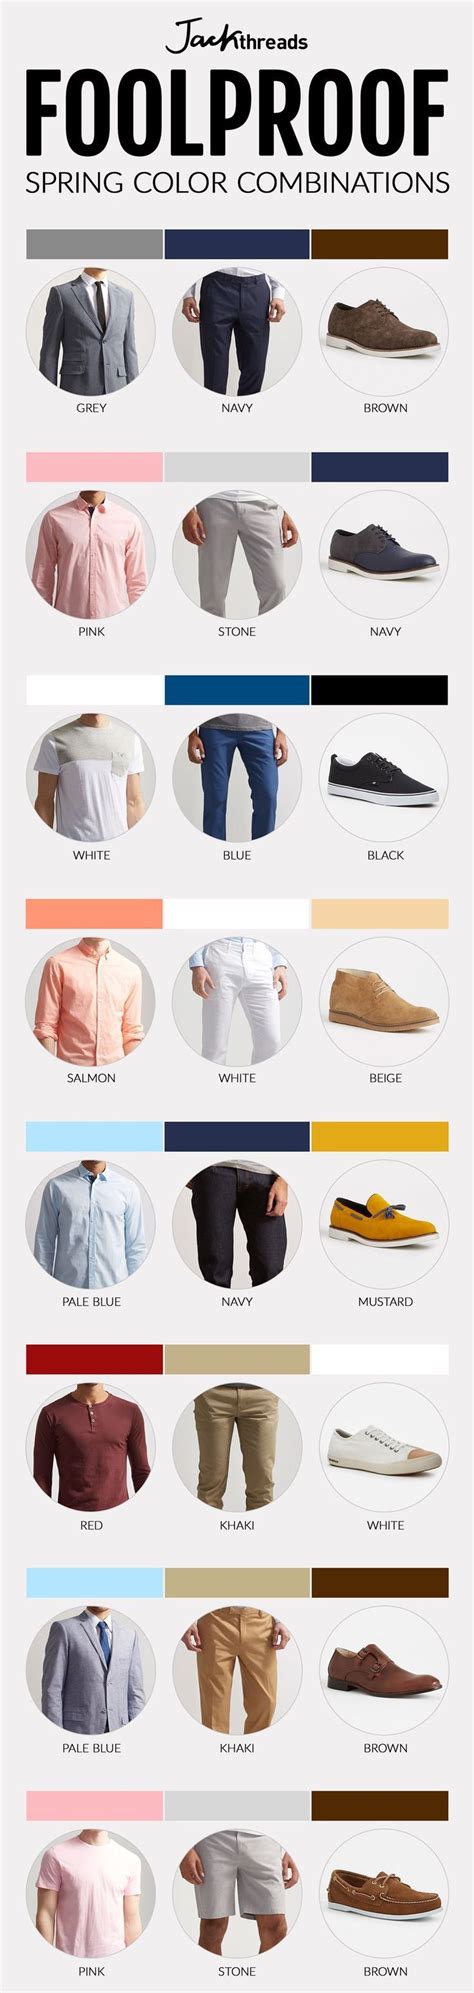 8 Foolproof Spring Color Combinations As Selected By A Stylist Mens